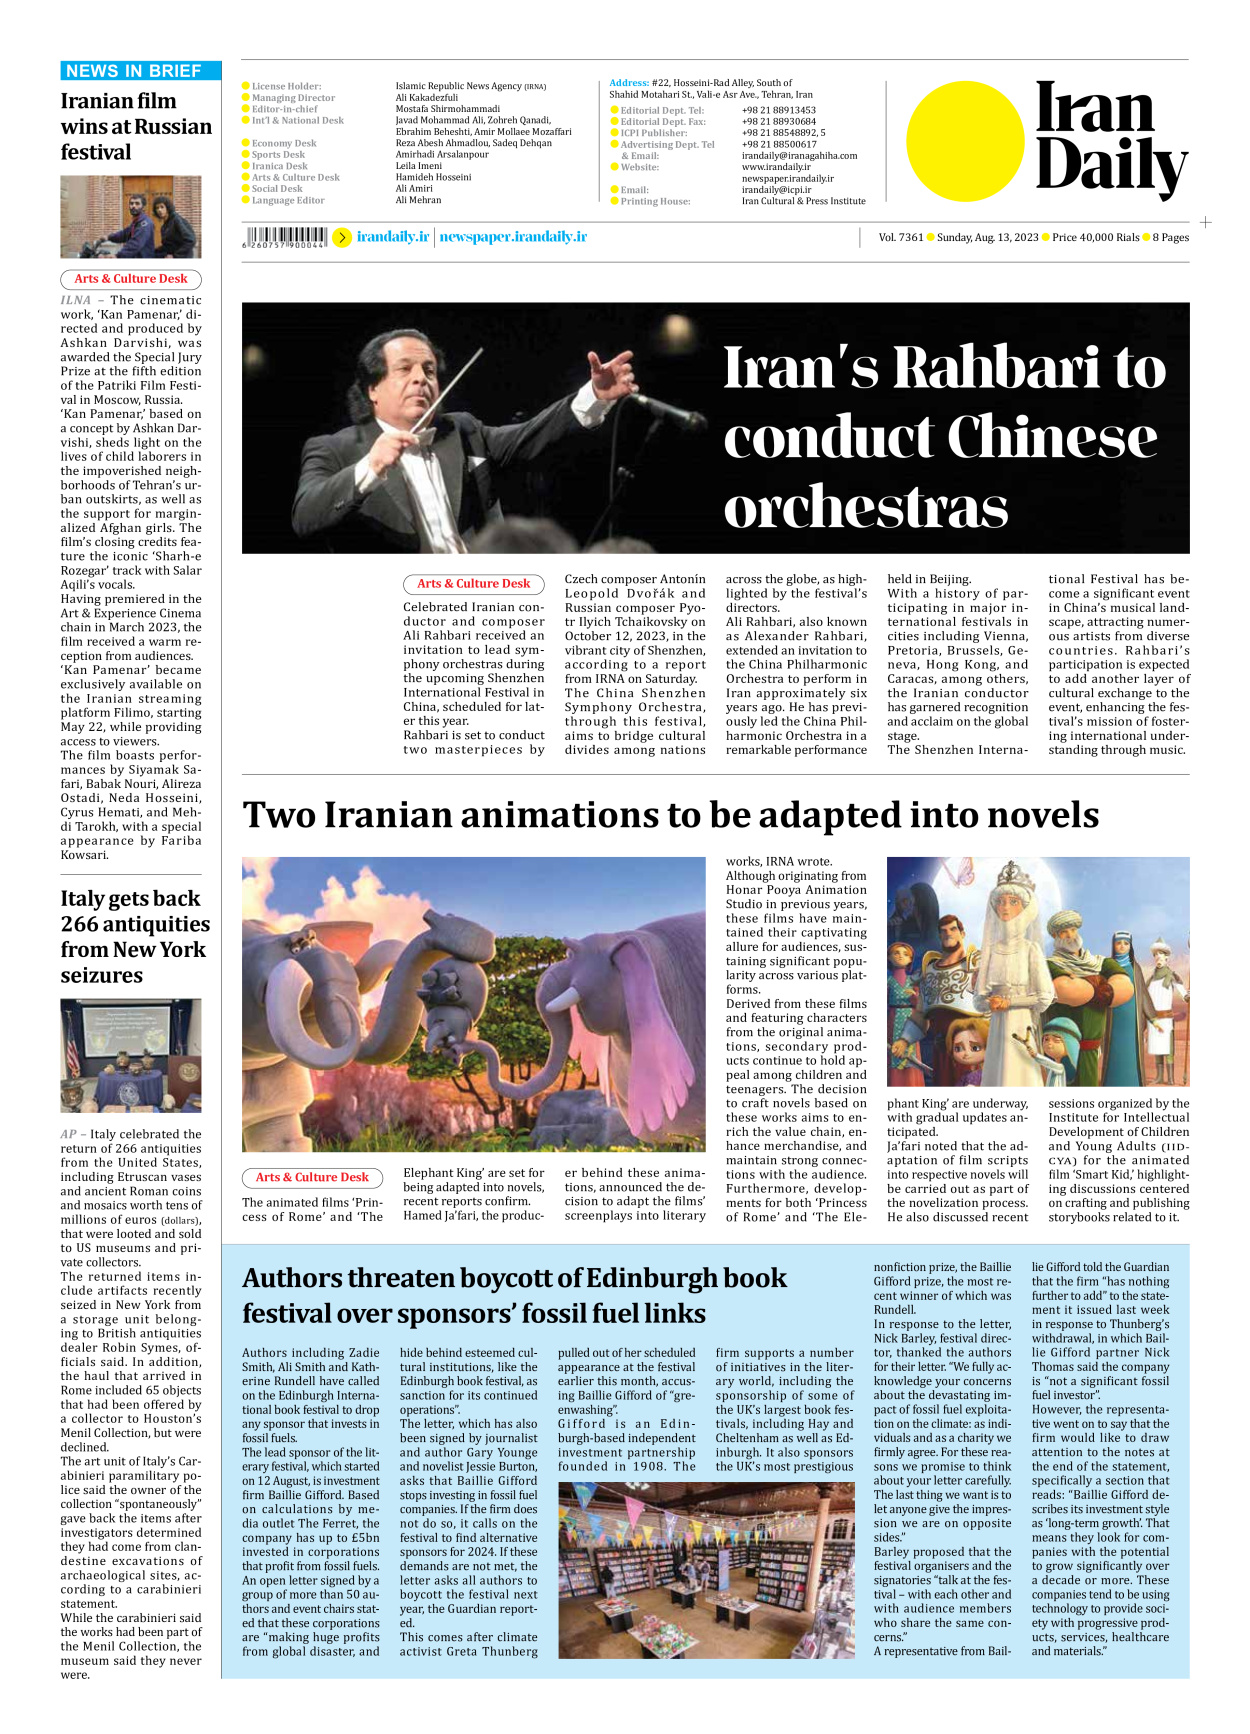 Iran Daily - Number Seven Thousand Three Hundred and Sixty One - 13 August 2023 - Page 8